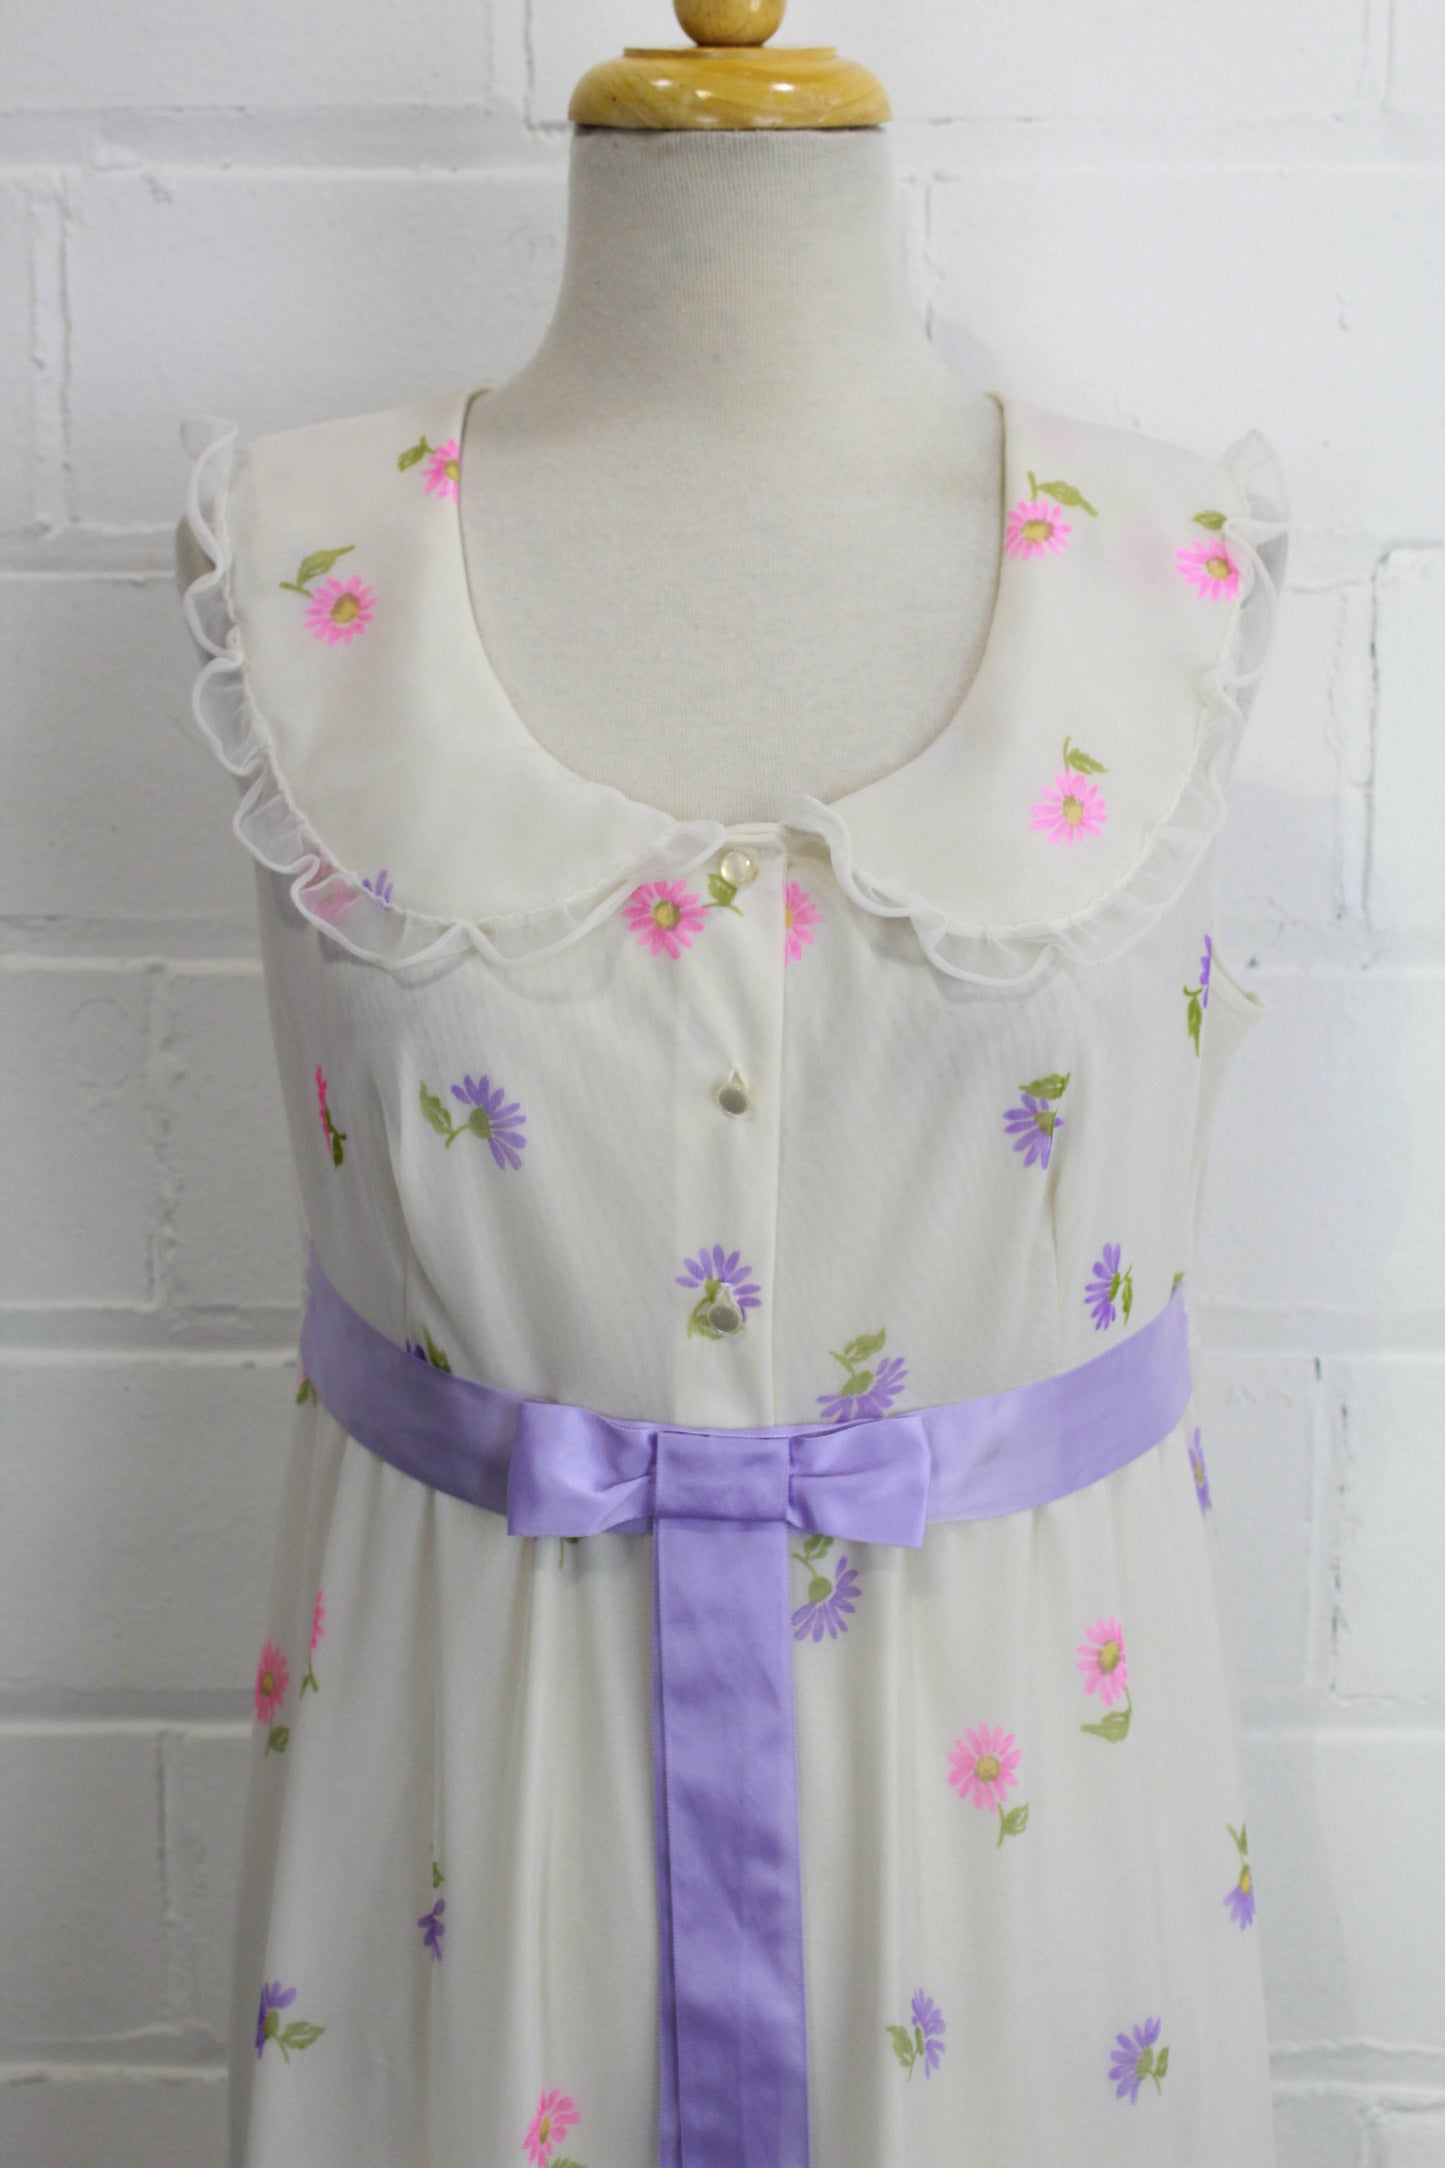 Vintage 1960s/70s White Chiffon with Lilac and Pink Floral Print Maxi Dress, Med